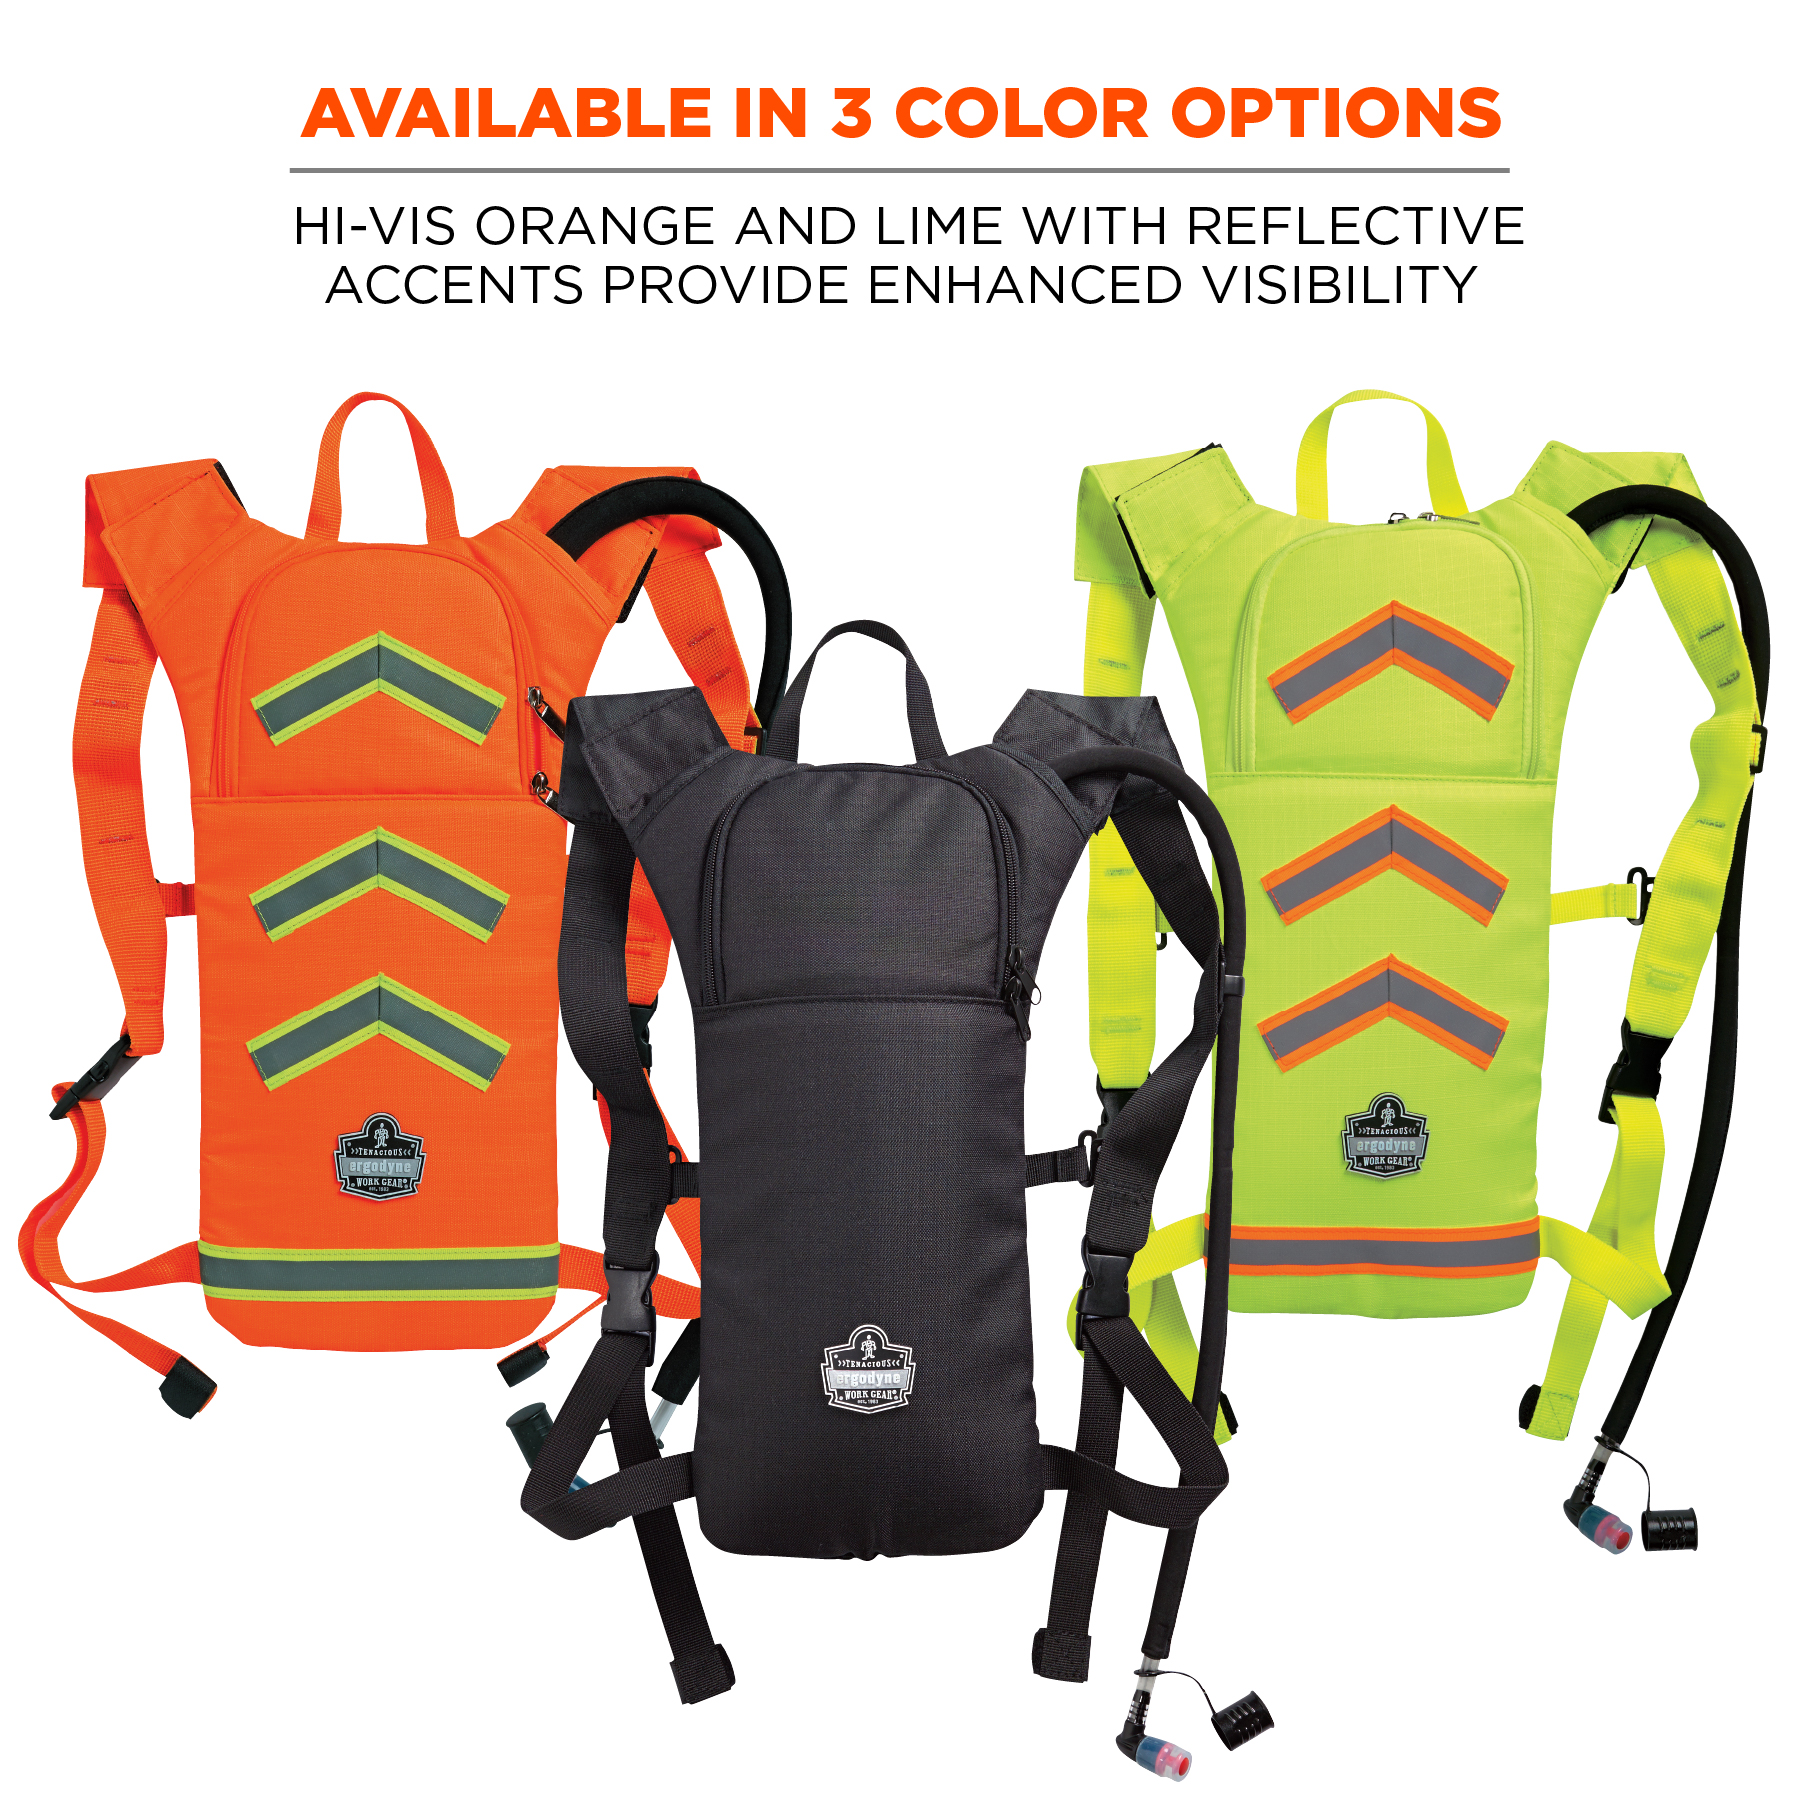 Ergodyne 5155 Chill-Its Low Profile Hydration Pack from Columbia Safety